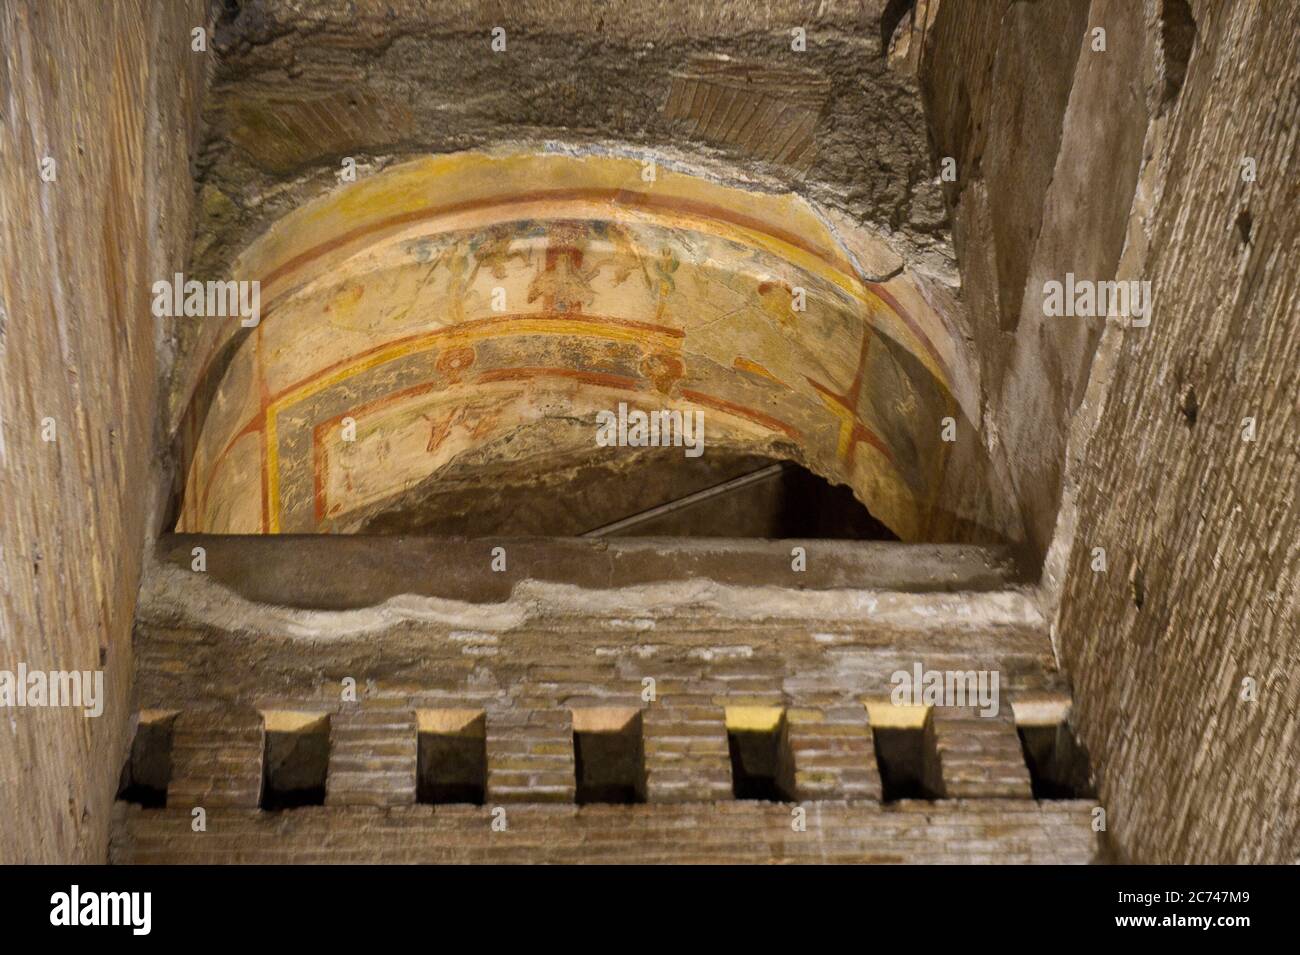 Europe, Italy, Lazio, Rome, Archeology at Domus Aurea palace. The Domus Aurea archaeological site is a large palace that was built on the orders of the Nerone Emperor near Anfiteatro Flavio called Colosseo. Stock Photo